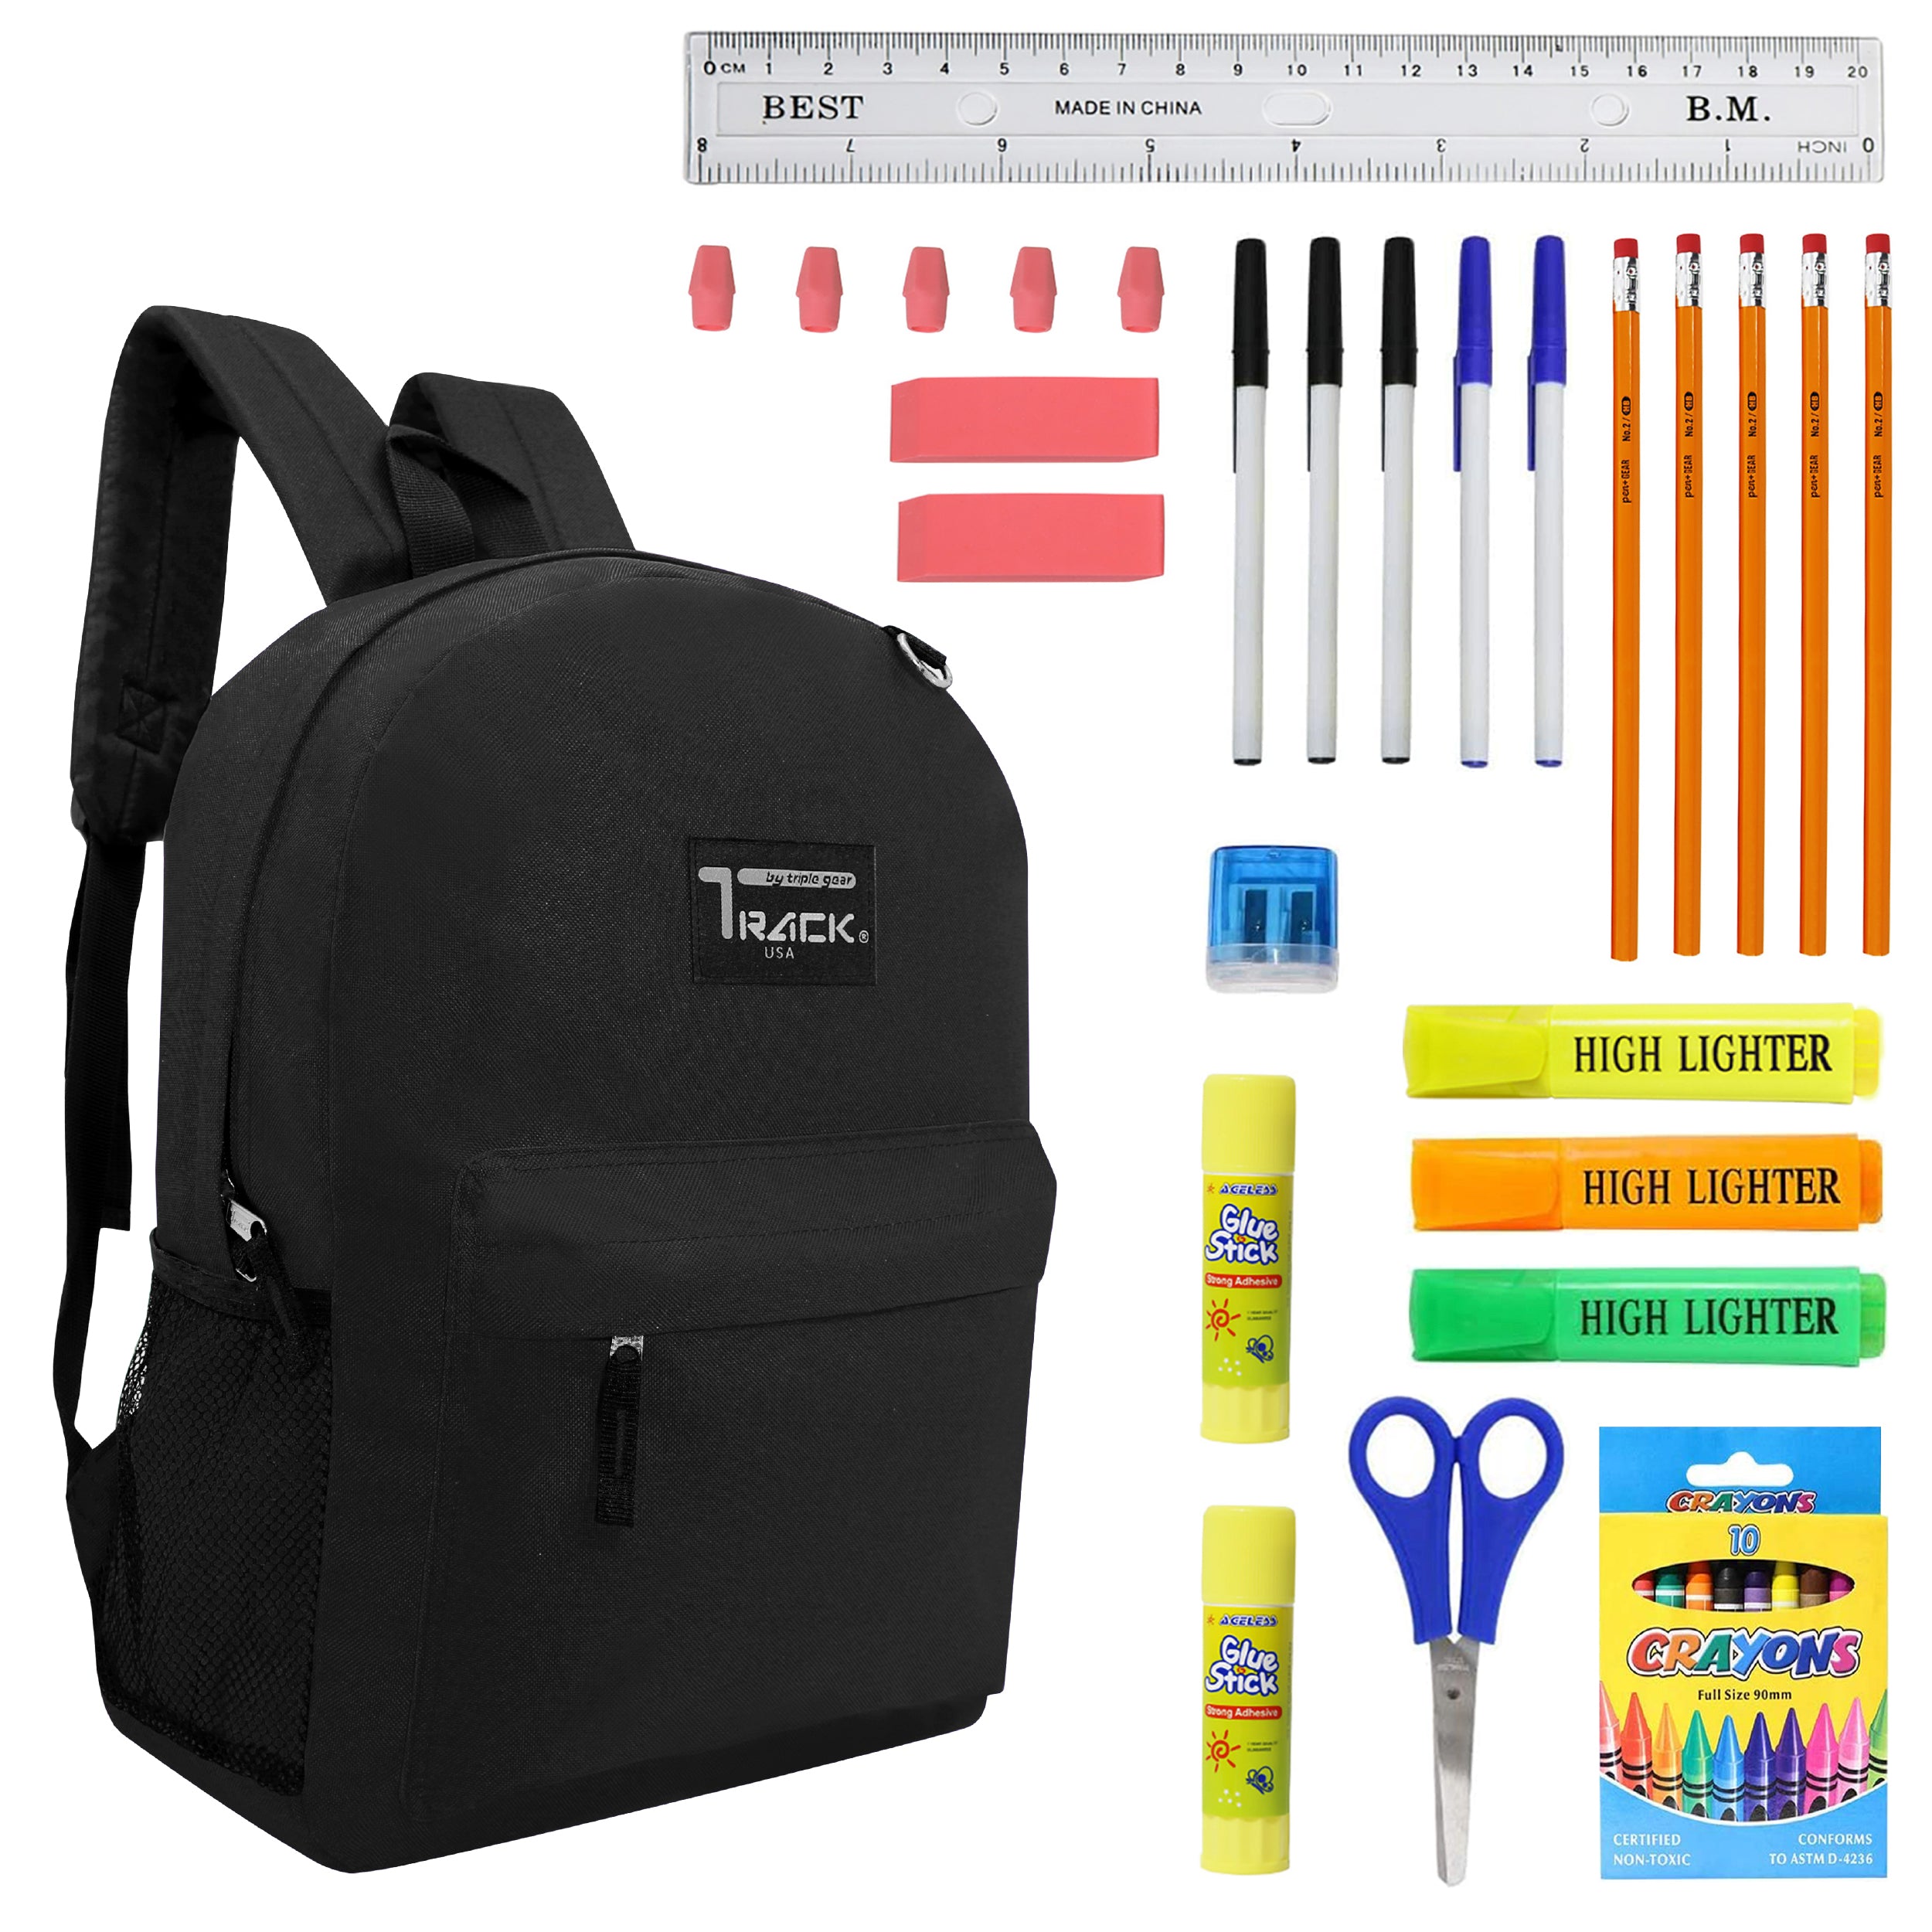 17 Inch Bulk Backpacks in Assorted Colors with School Supply Kits wholesale - Case of 12